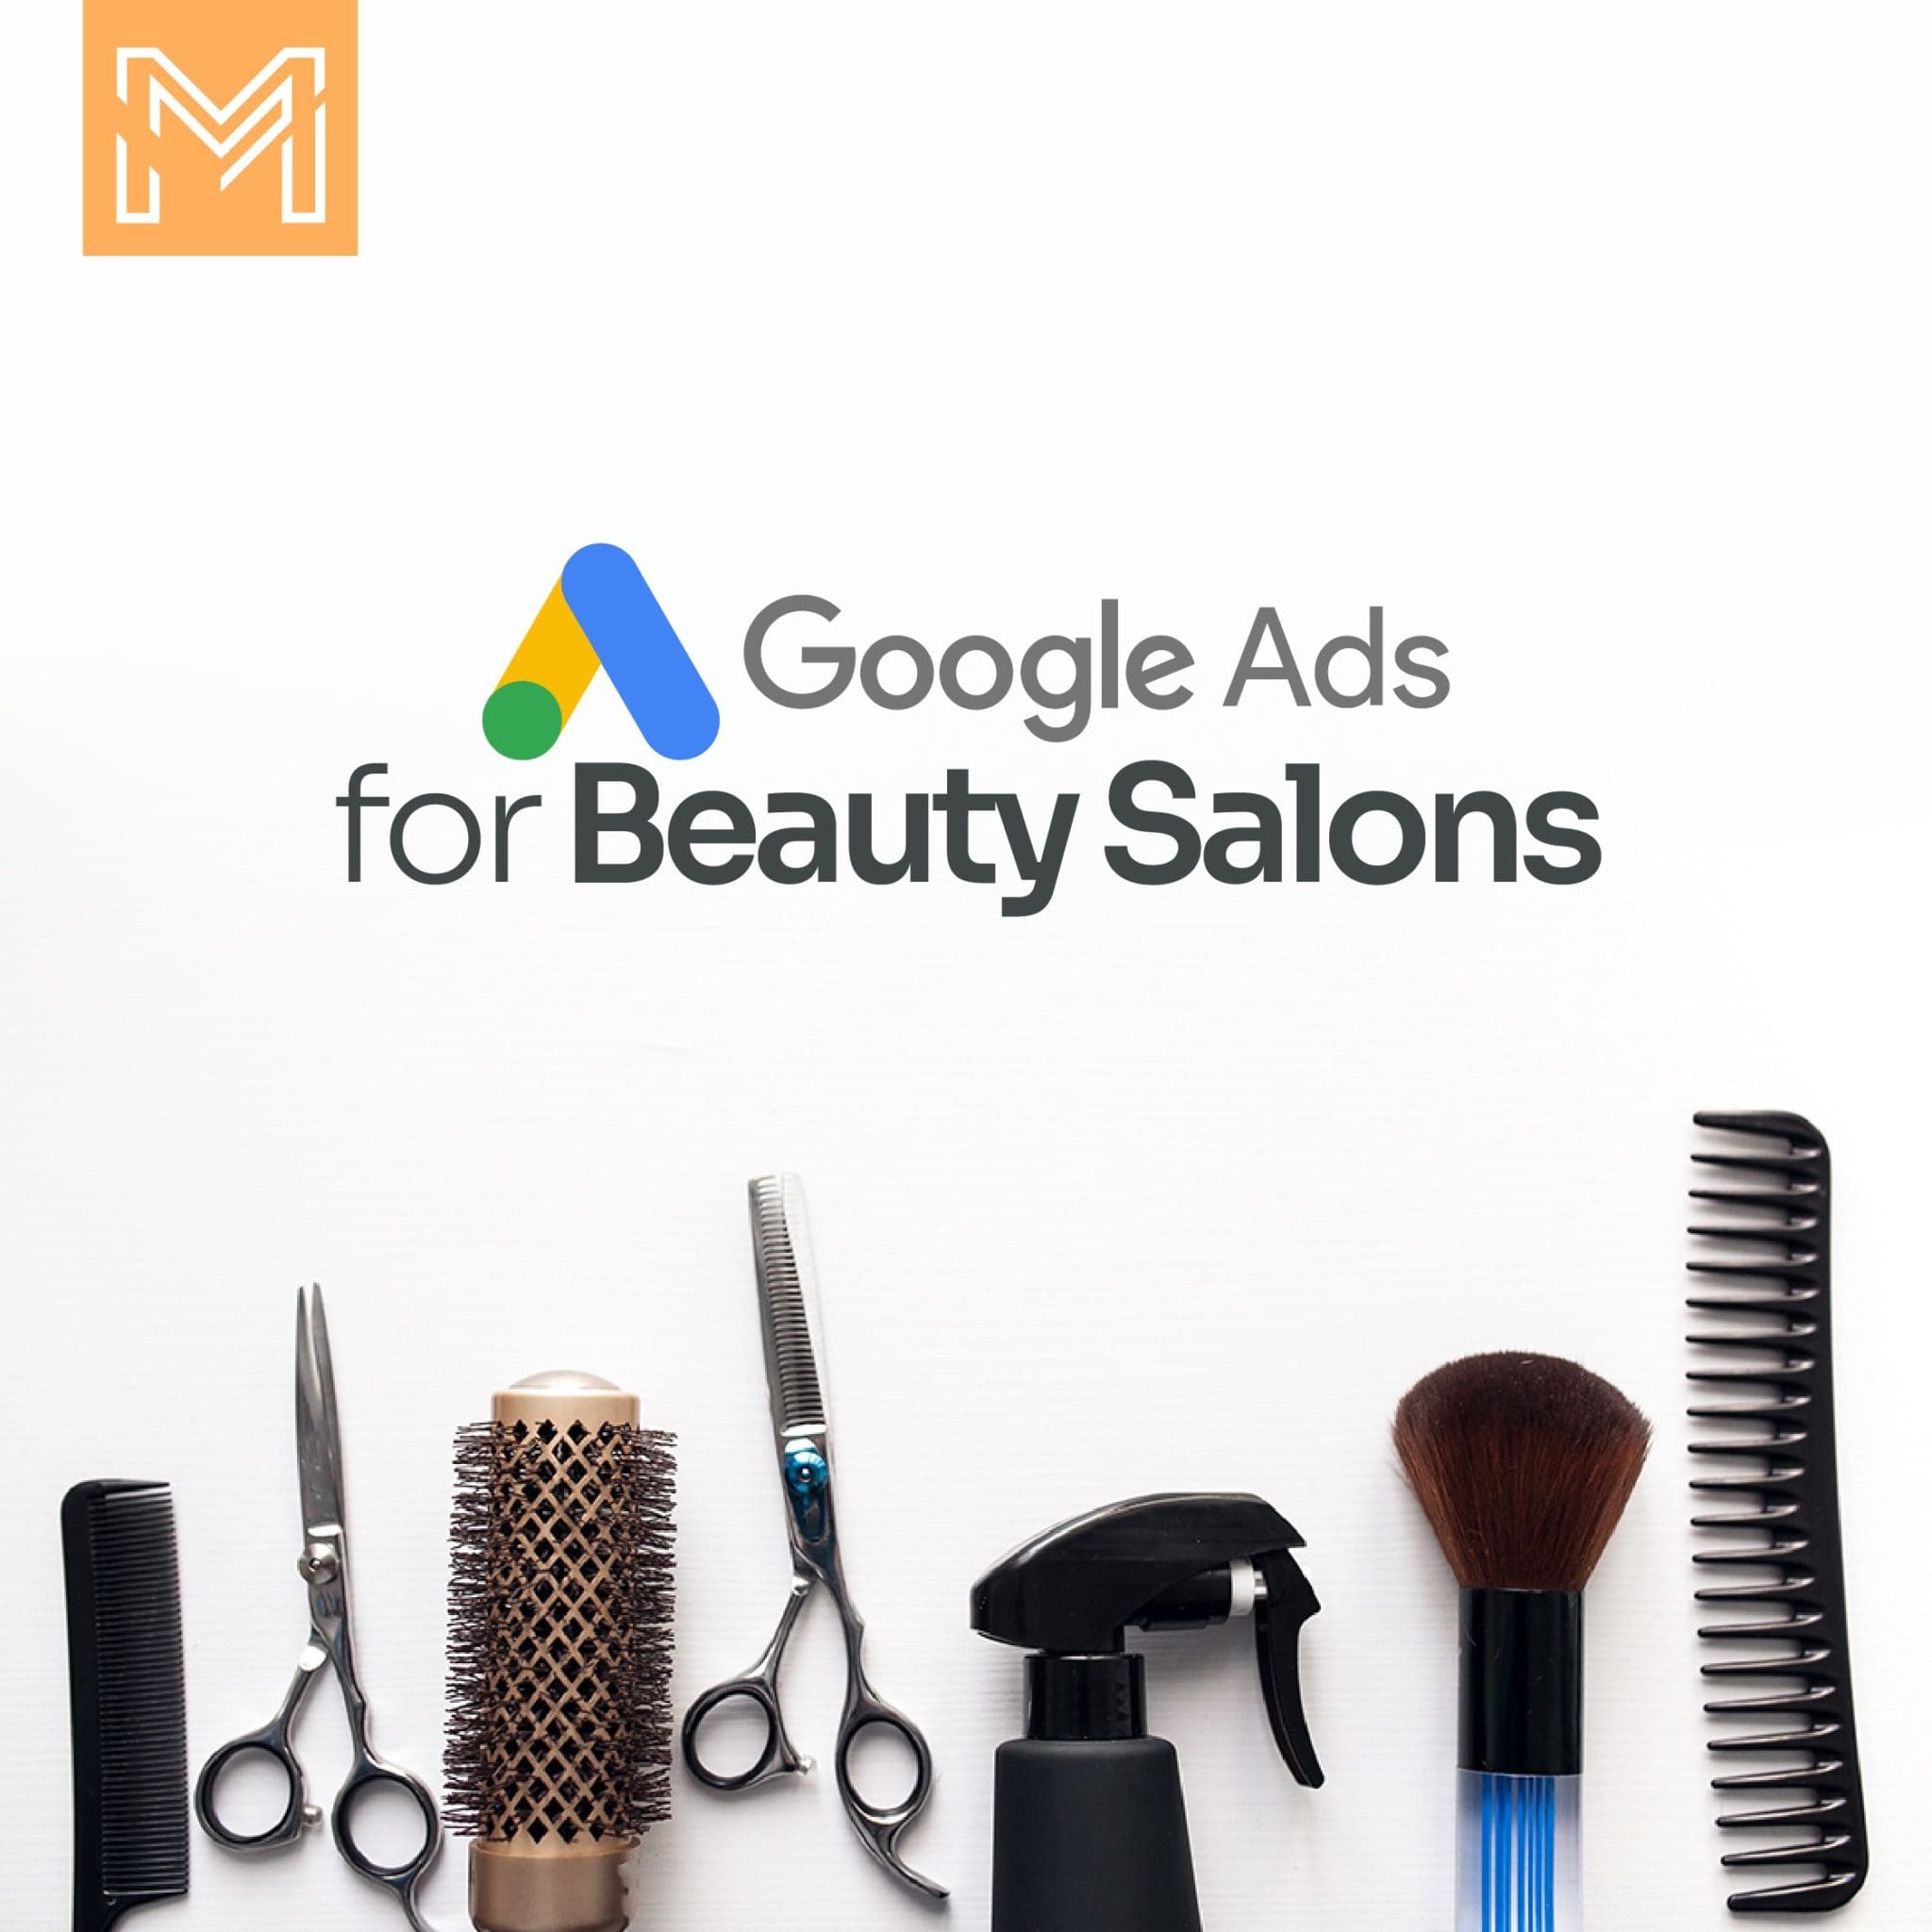 Google Ads for Beauty Salons